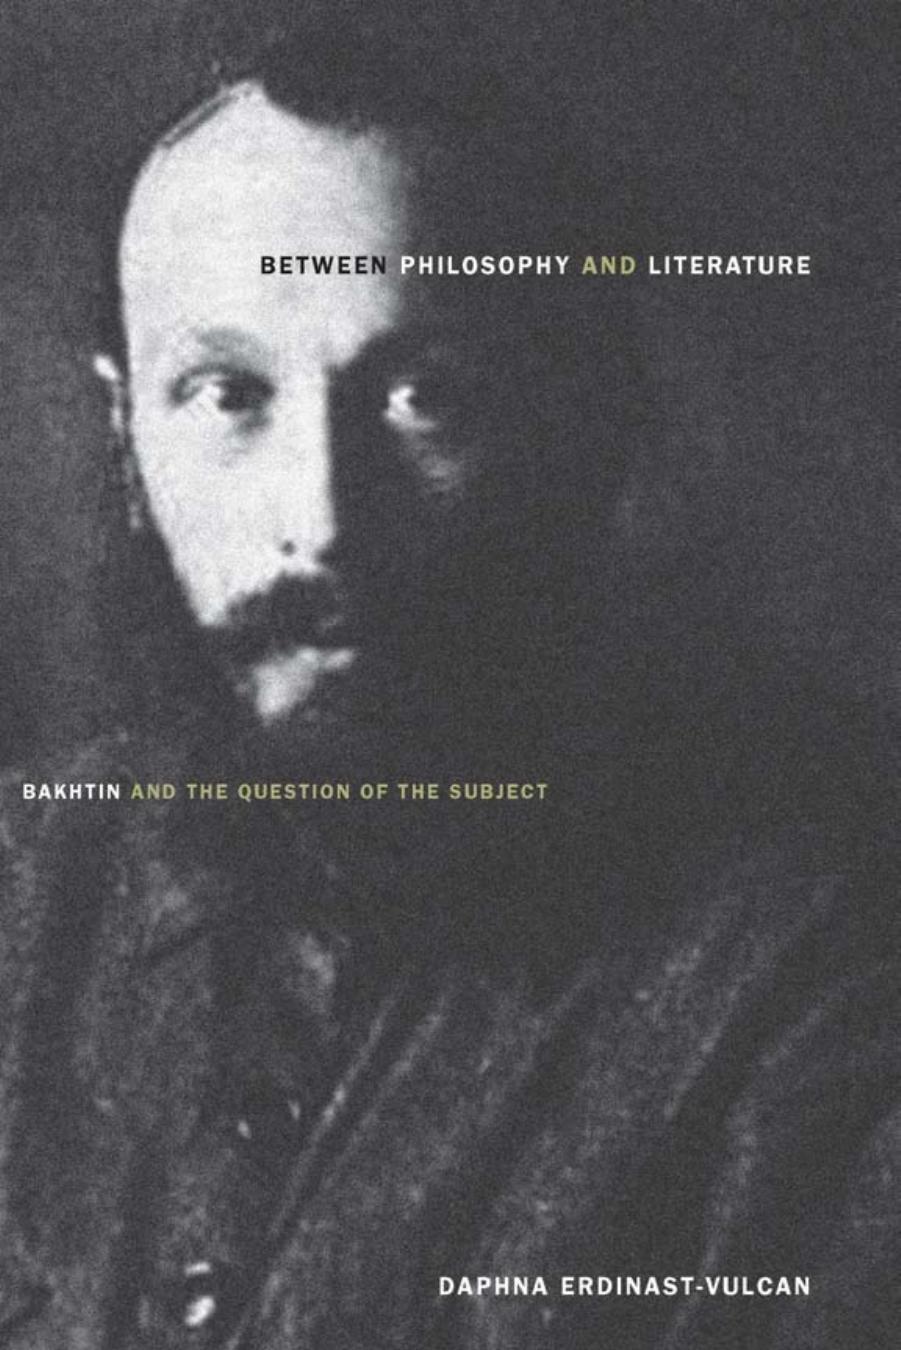 Between Philosophy and Literature: Bakhtin and the Question of the Subject